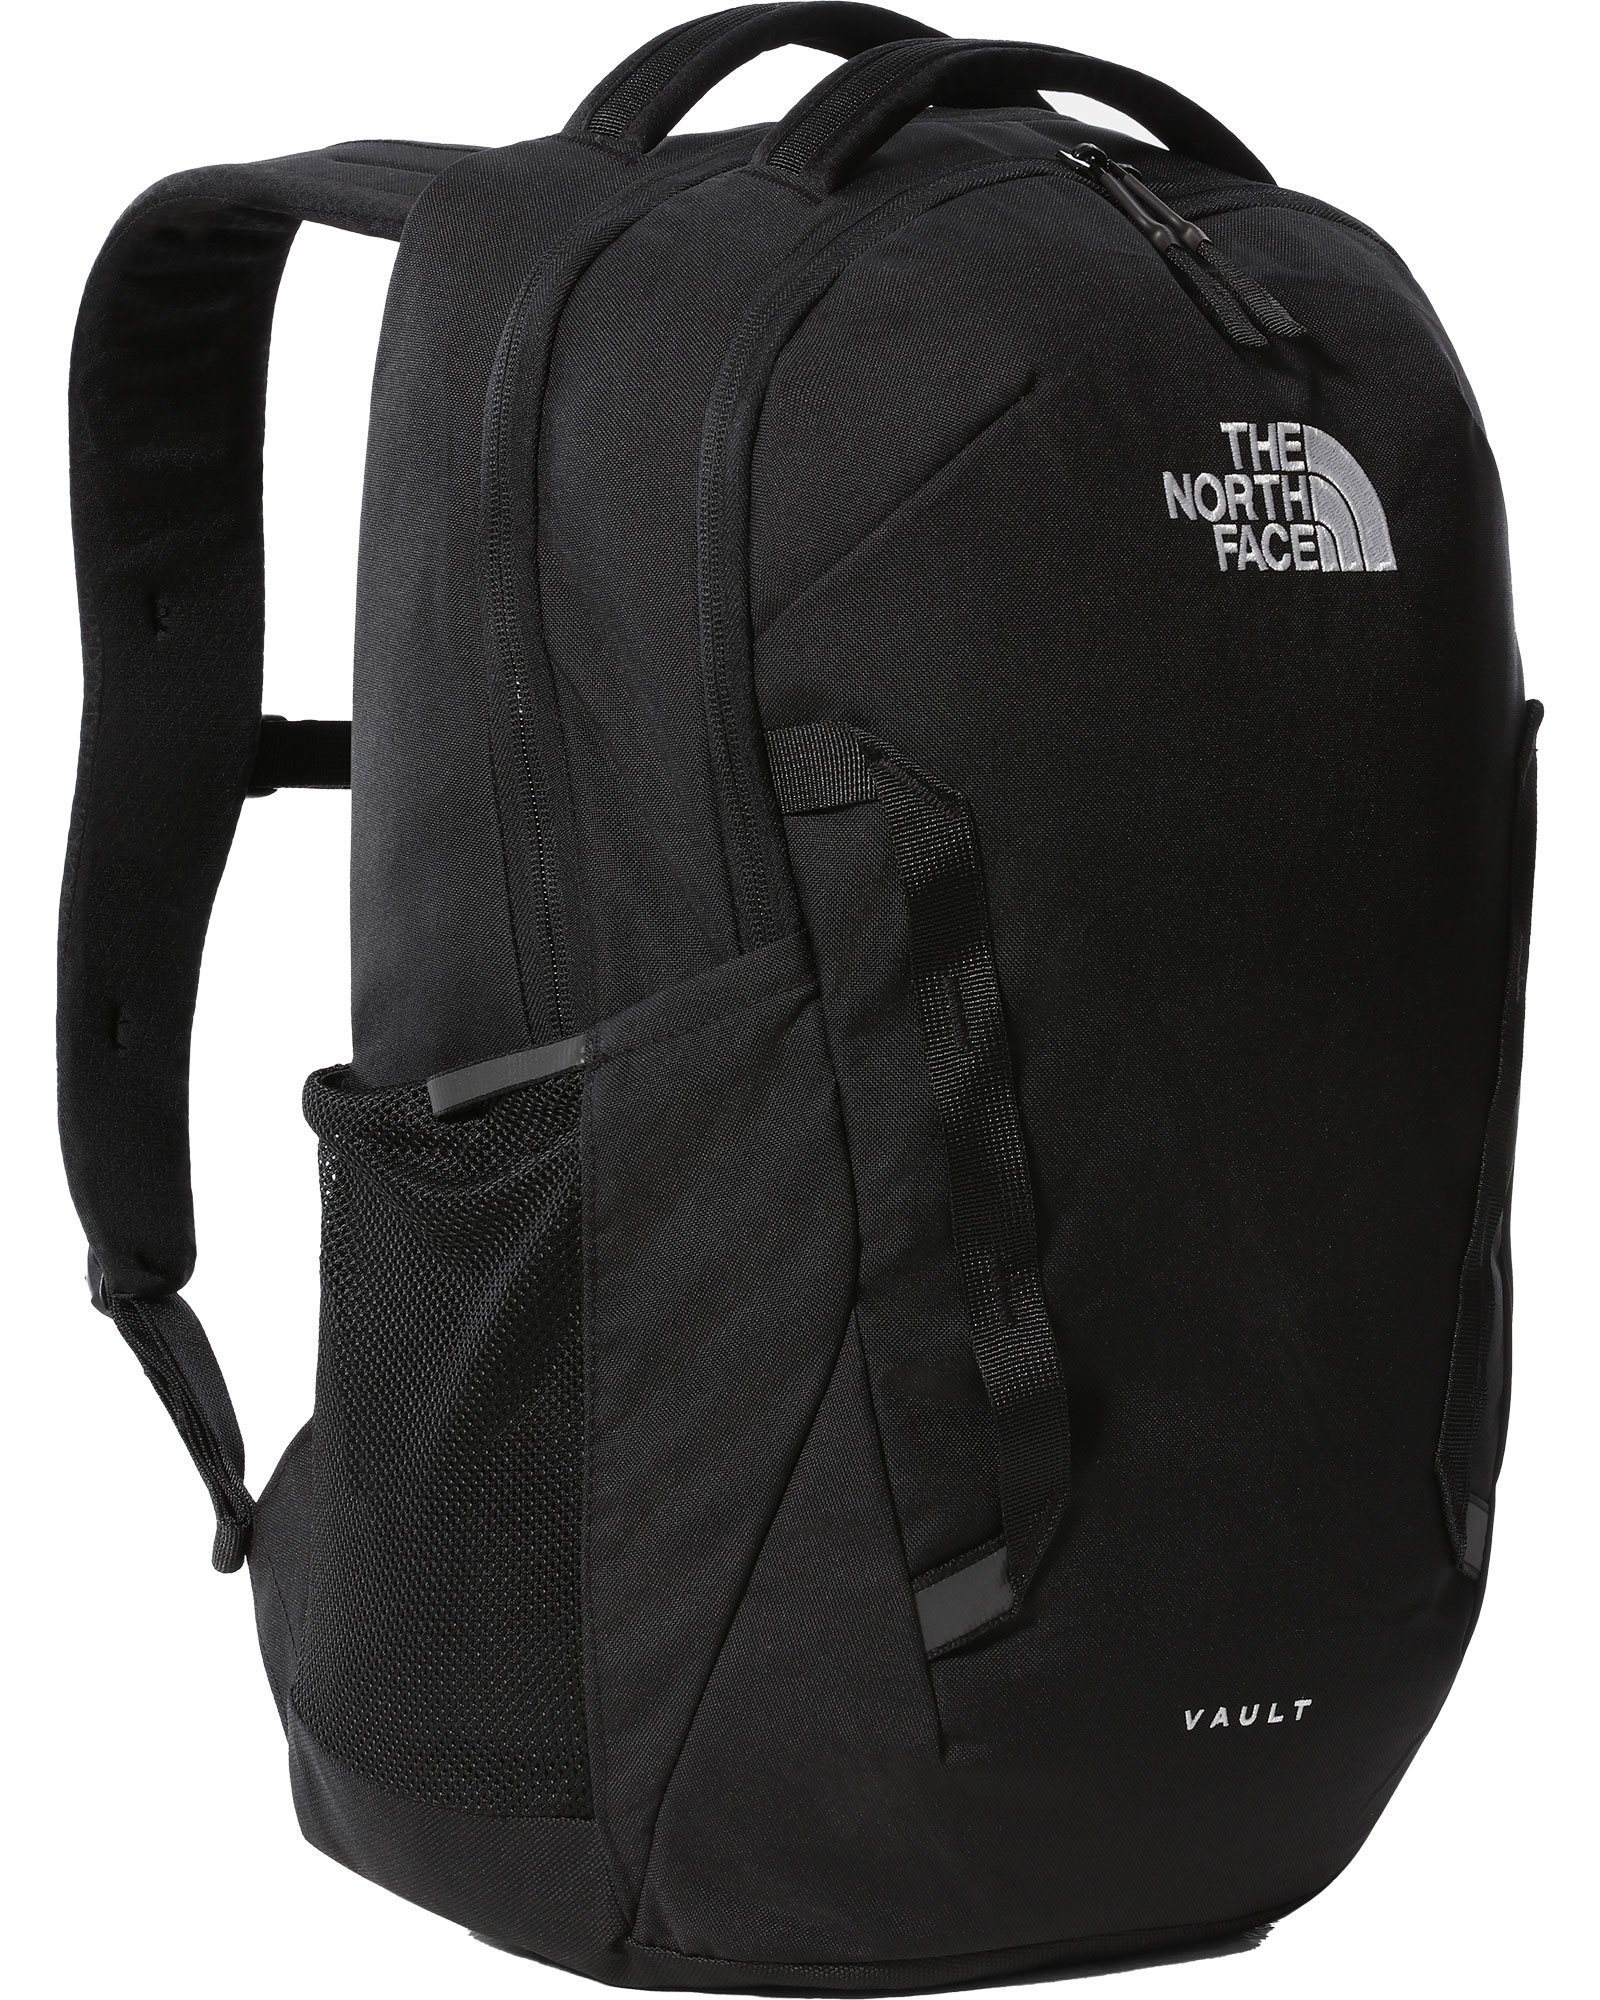 The North Face Vault Backpack - TNF Black